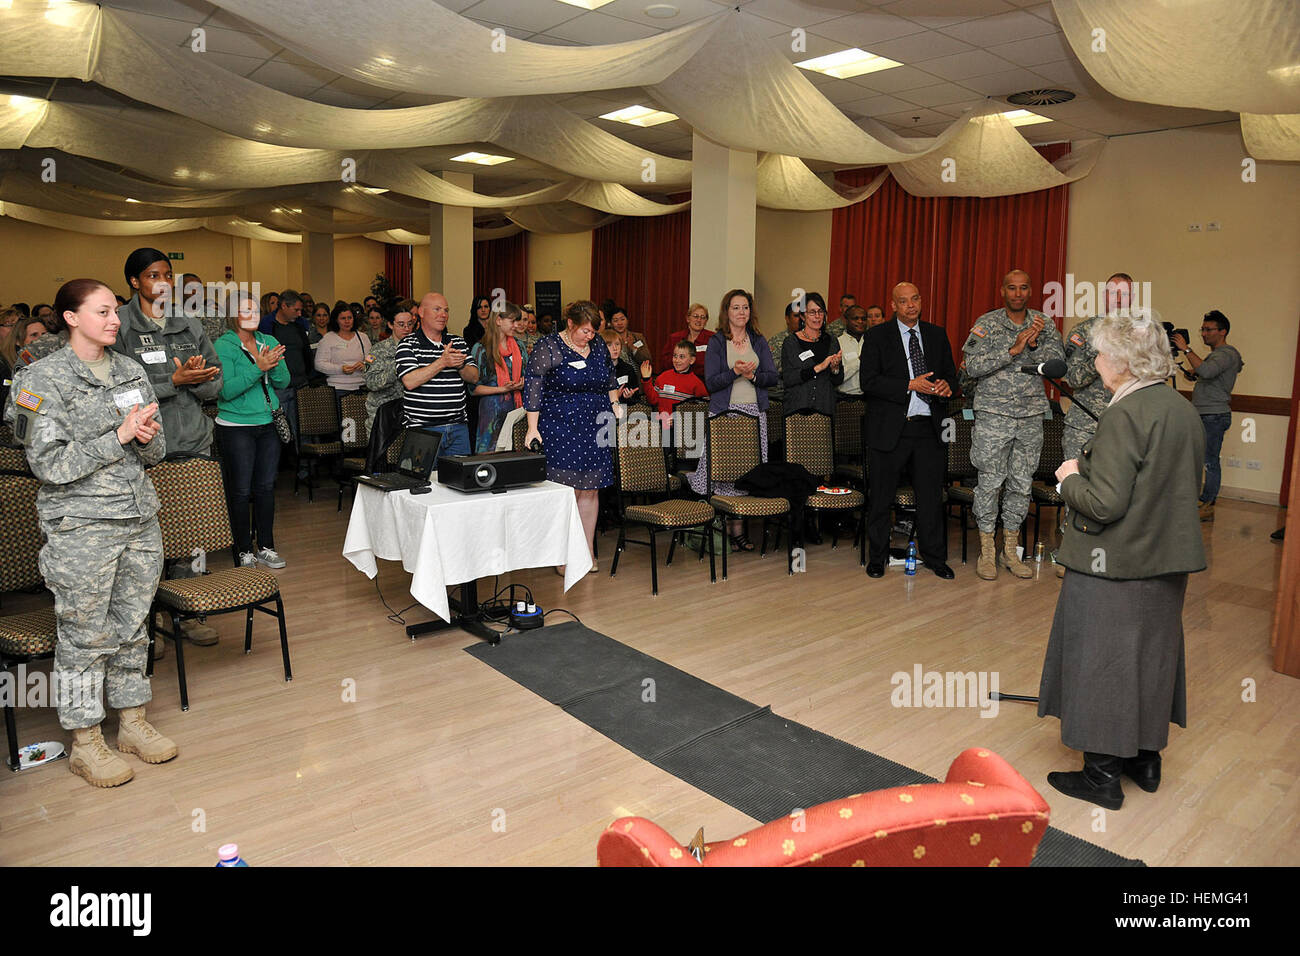 Noreen Riols, World War II British spy, receives a standing ovation applause from the community at the meeting of Women's History Month, March 28, 2013 in Caserma Ederle Vicenza, Italy. (U.S. Army photo by Paolo Bovo JM436 7 JMTC Vicenza - Italy/Released Noreen Riols, World War II British spy 130328-A-JM436-030 Stock Photo